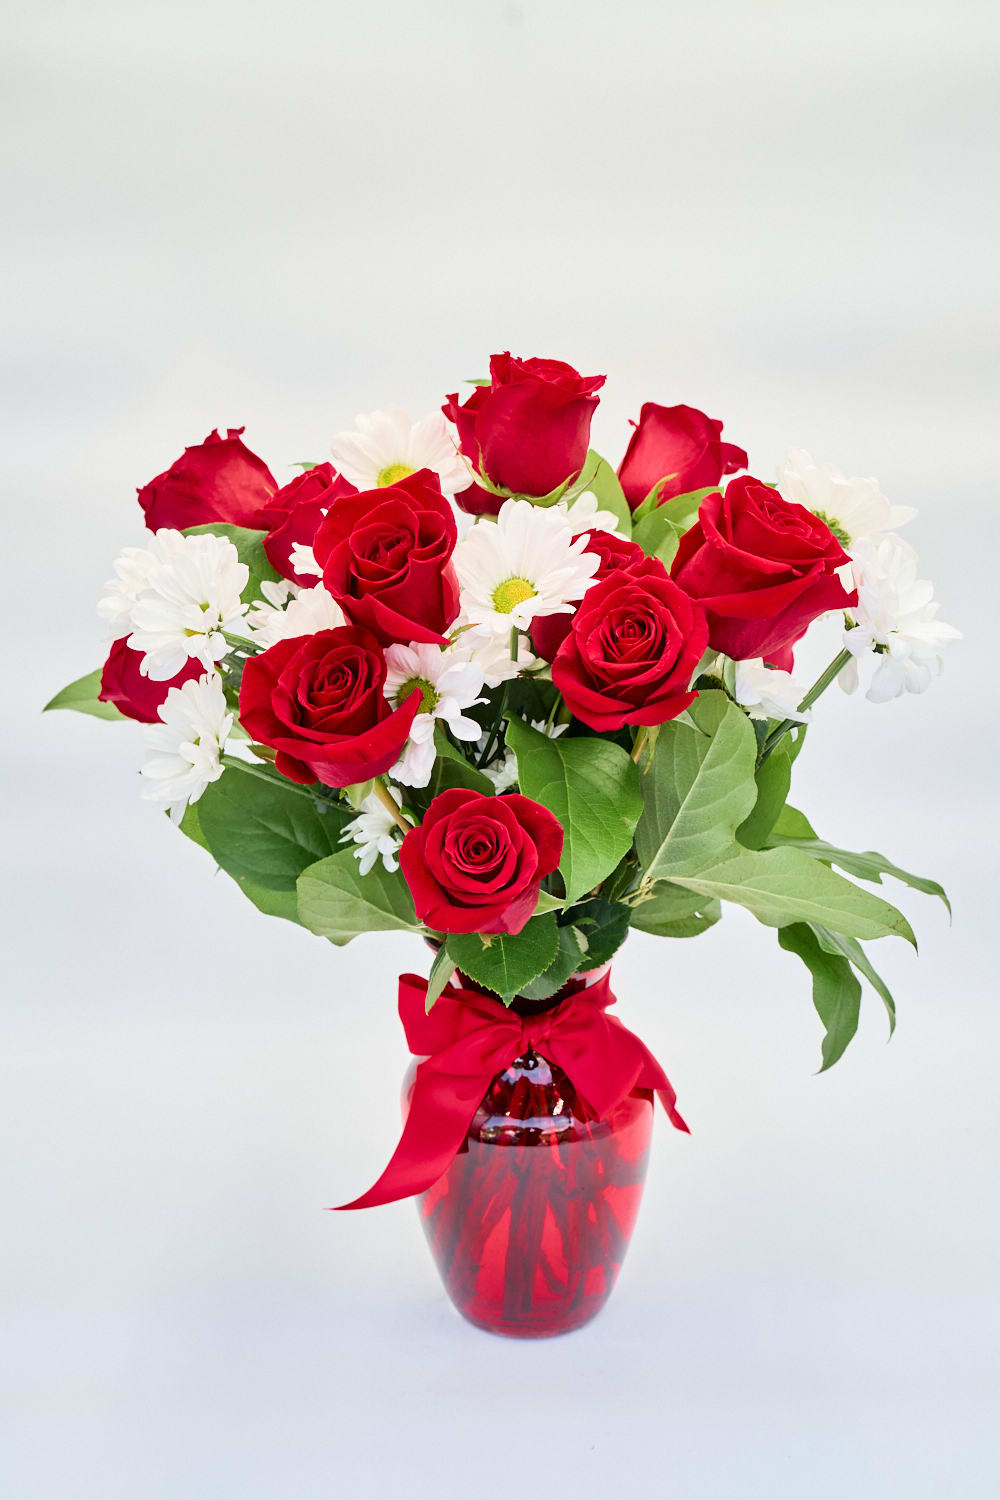 Roses and Daisies in a red glass vase, finished with a red